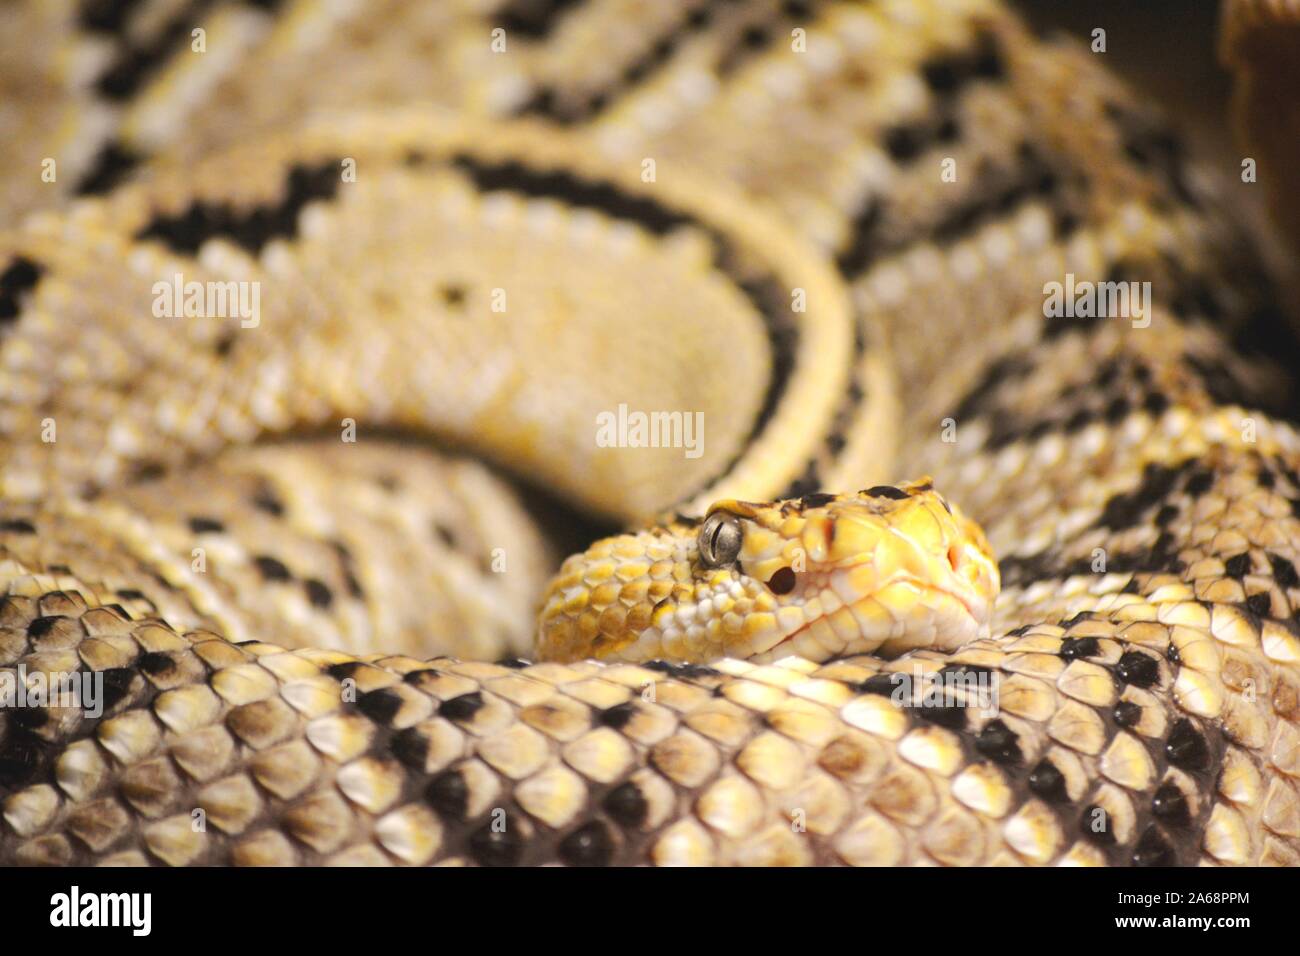 one beautiful and poisonous snake coiled Stock Photo